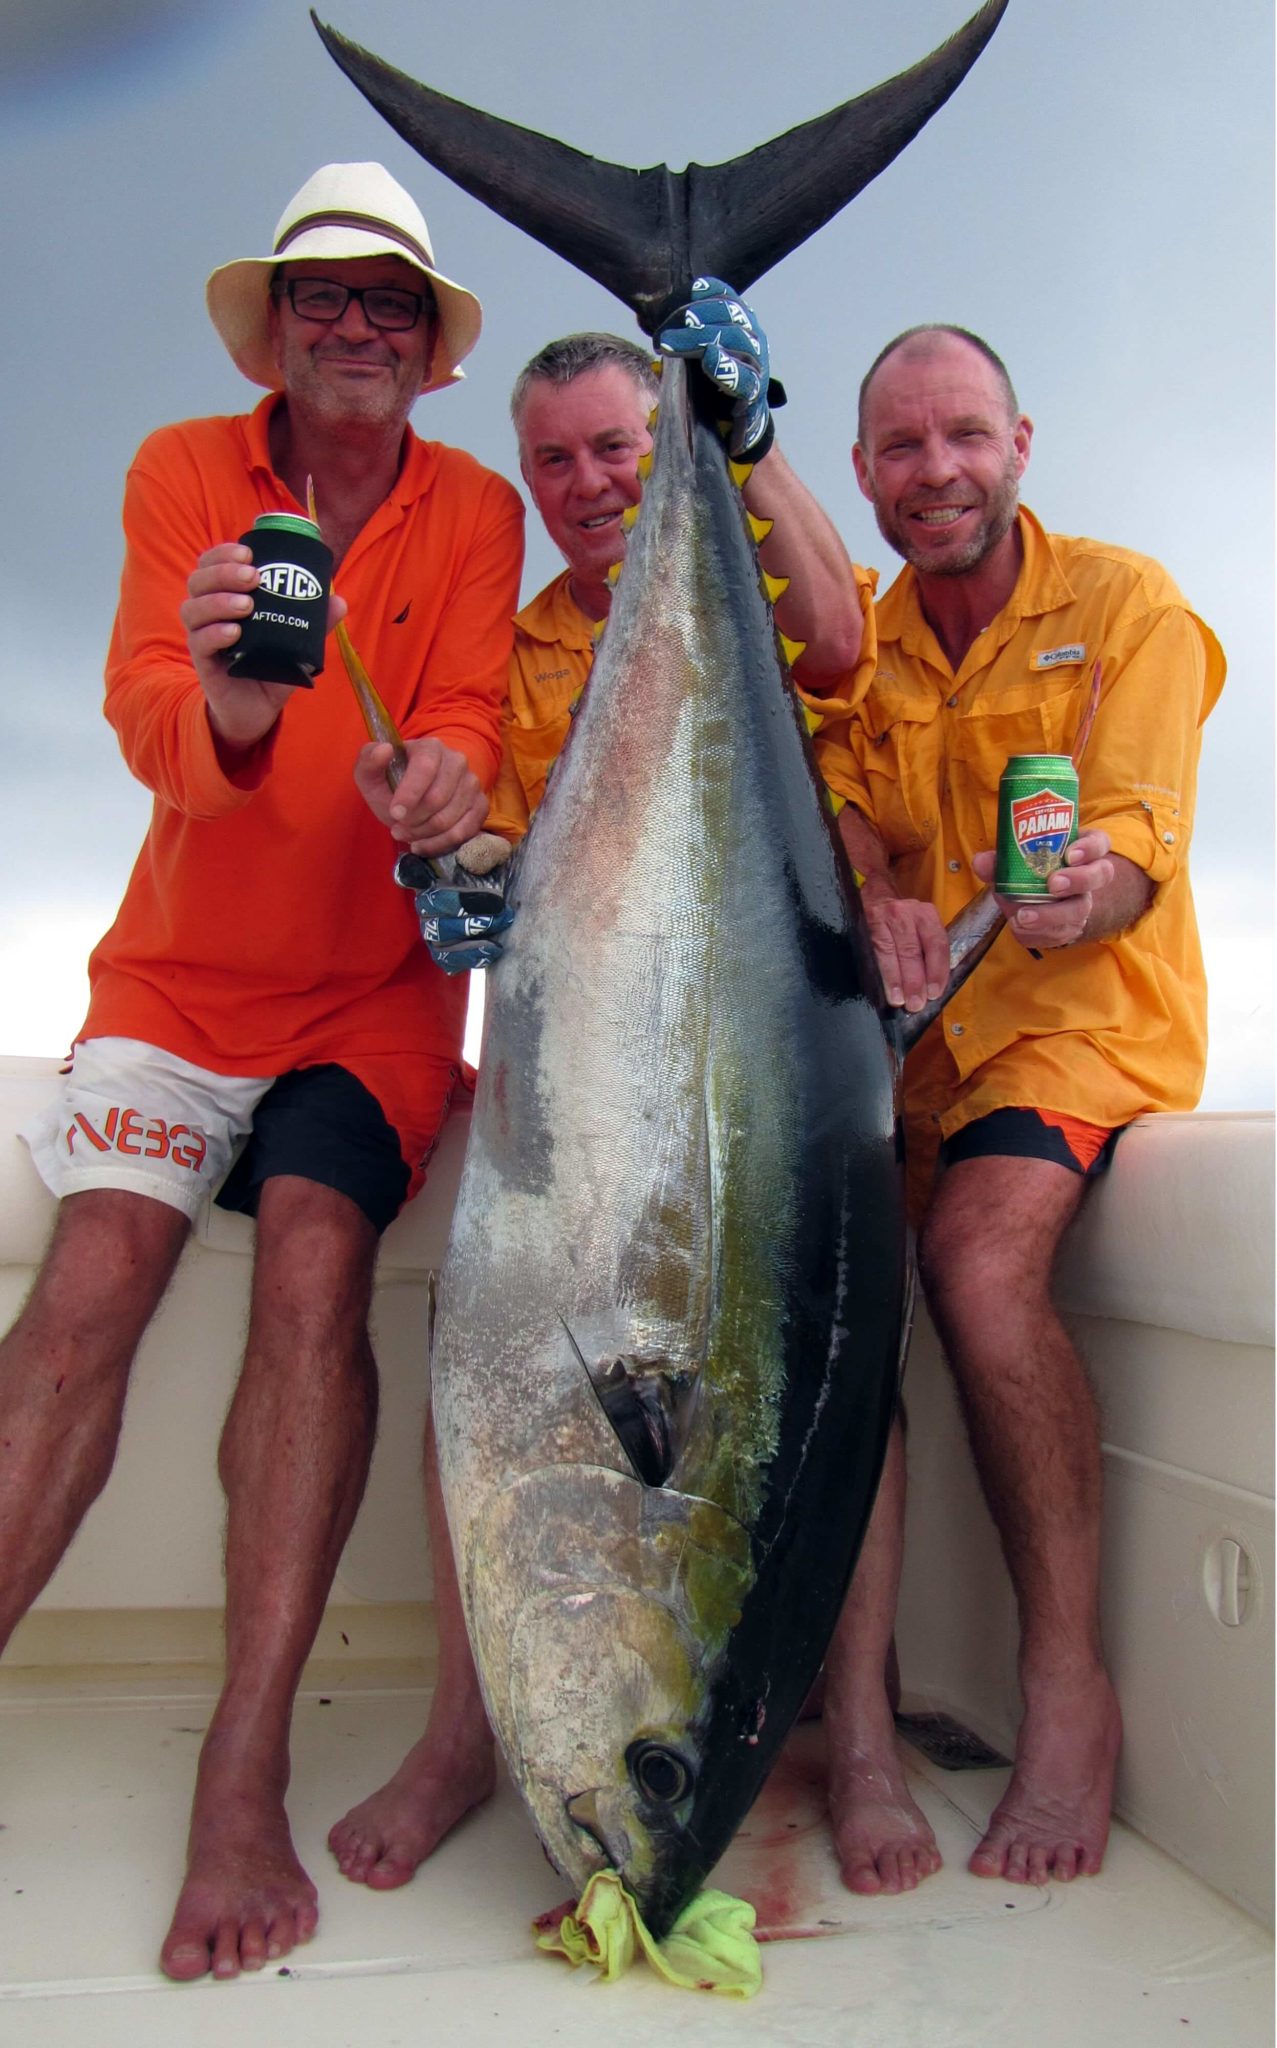 Three anglers holding 230 pound yellowfin tuna, smiling with beers